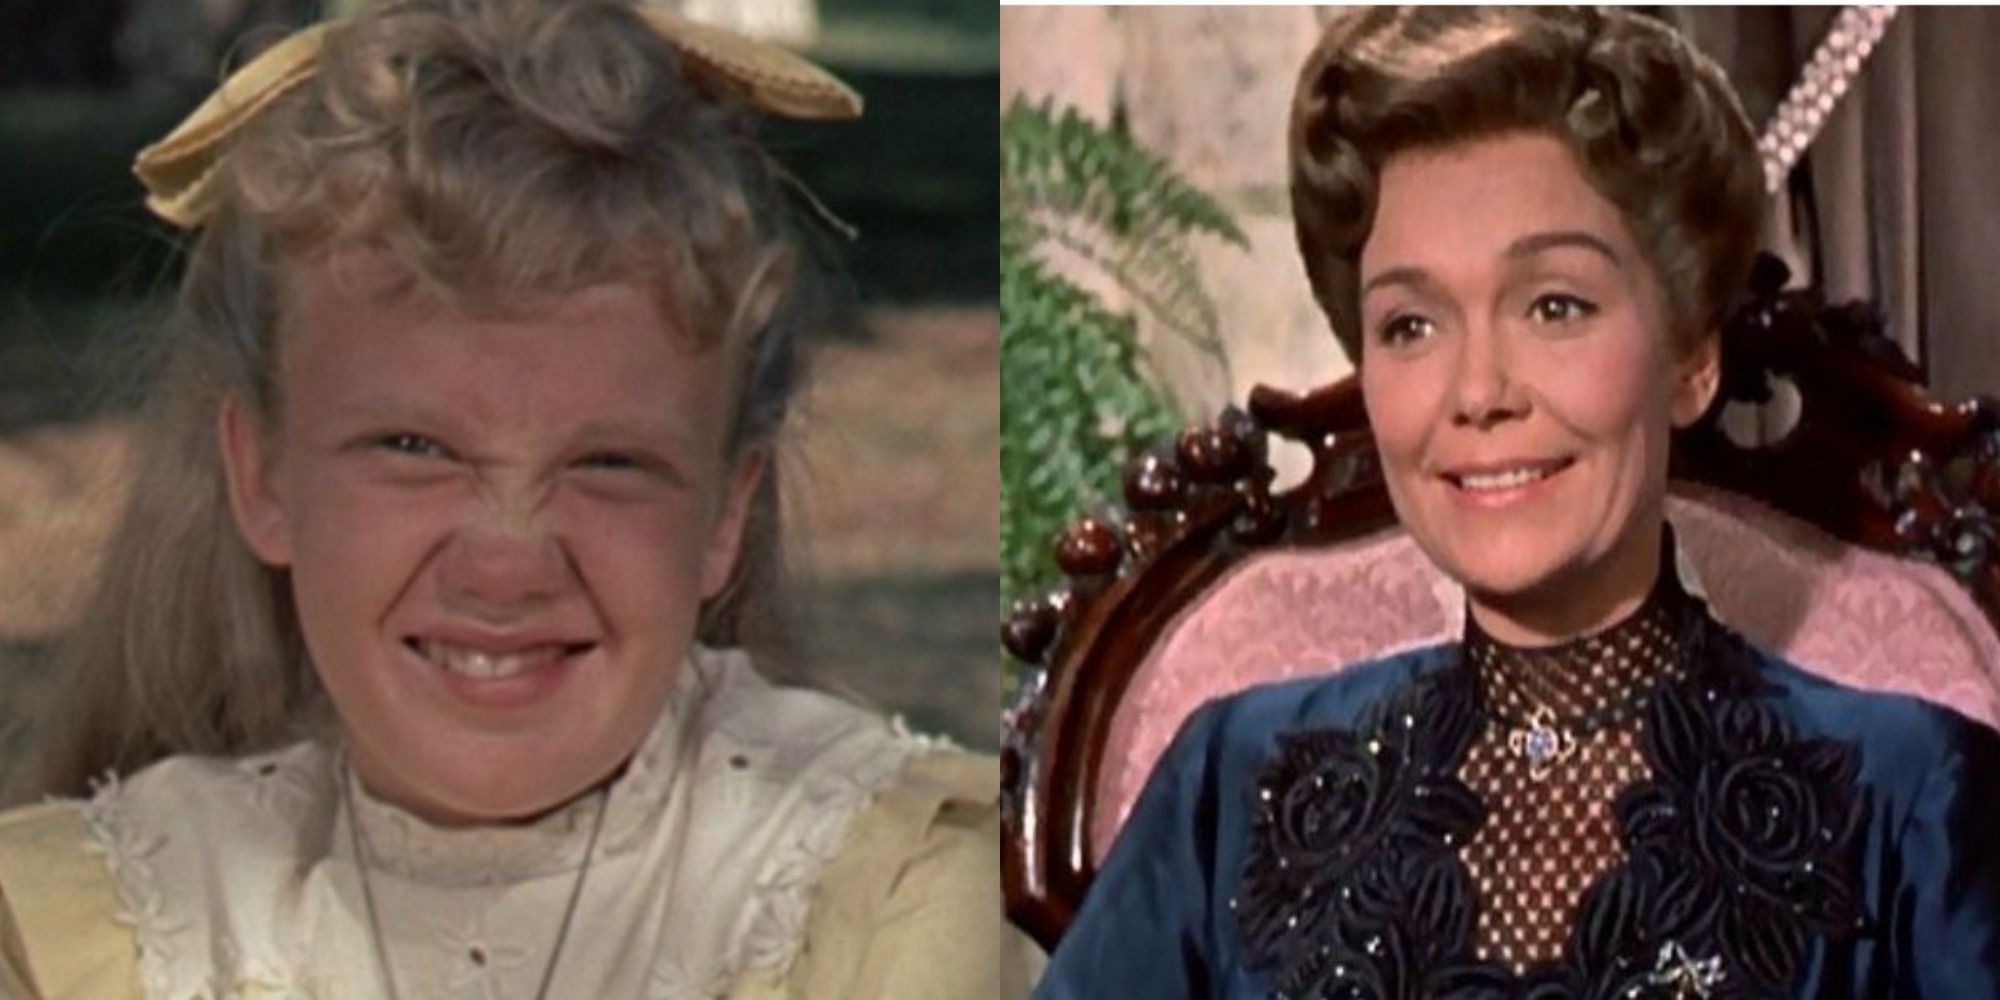 Side by side image of Pollyanna and Aunt Polly from Pollyanna